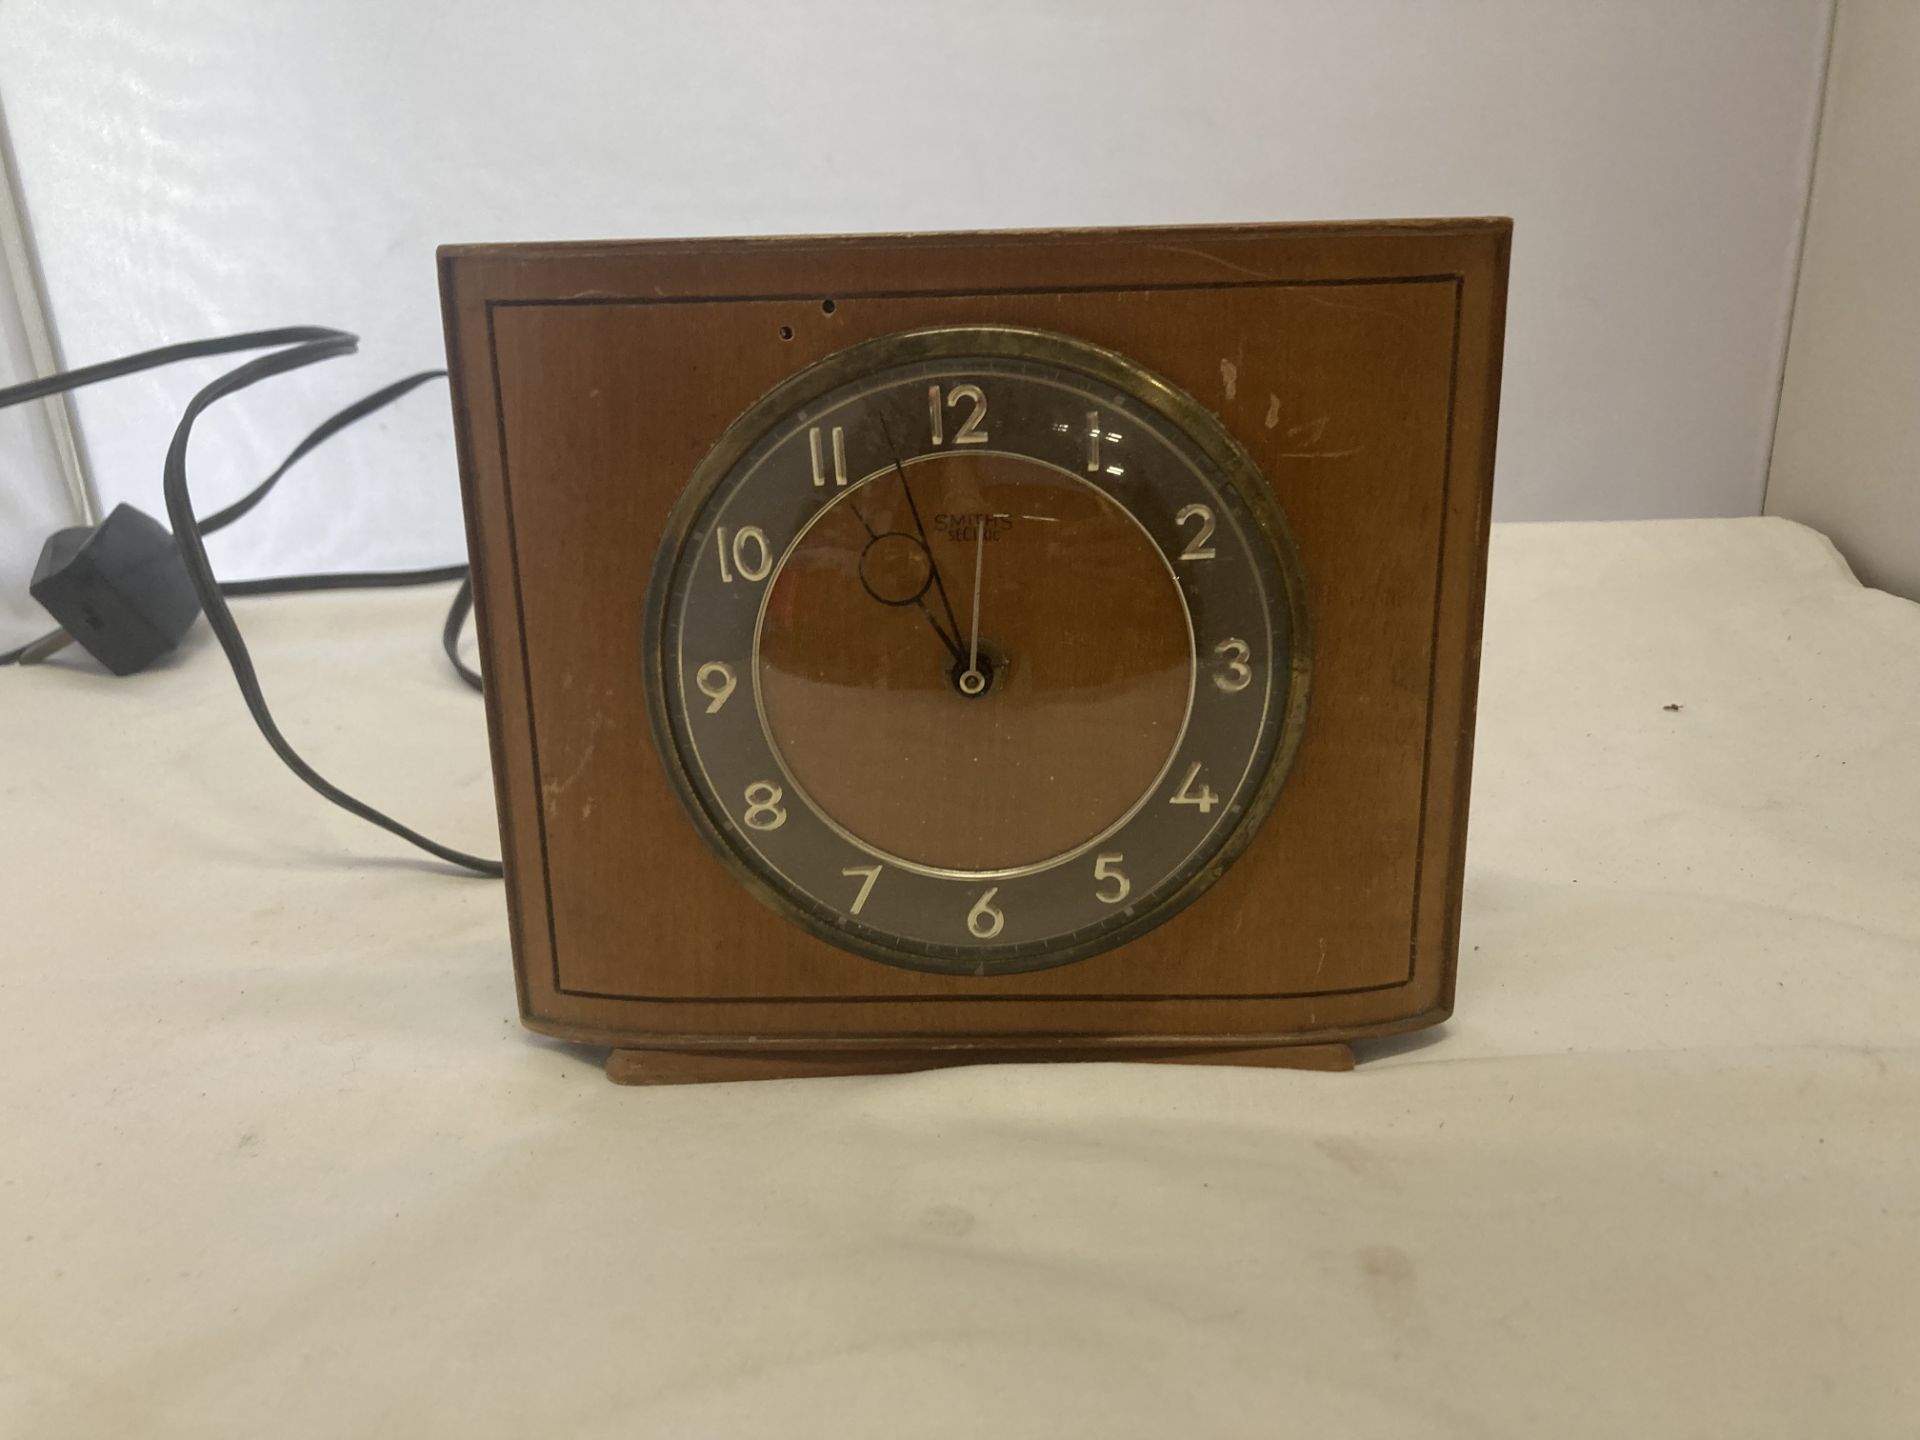 TWO MAHOGANY CASED WALL CLOCKS, A WESTCLOX 'BIG BEN' ALARM CLOCK, A SMITHS VINTAGE ELECTRIC MANTLE - Image 11 of 21